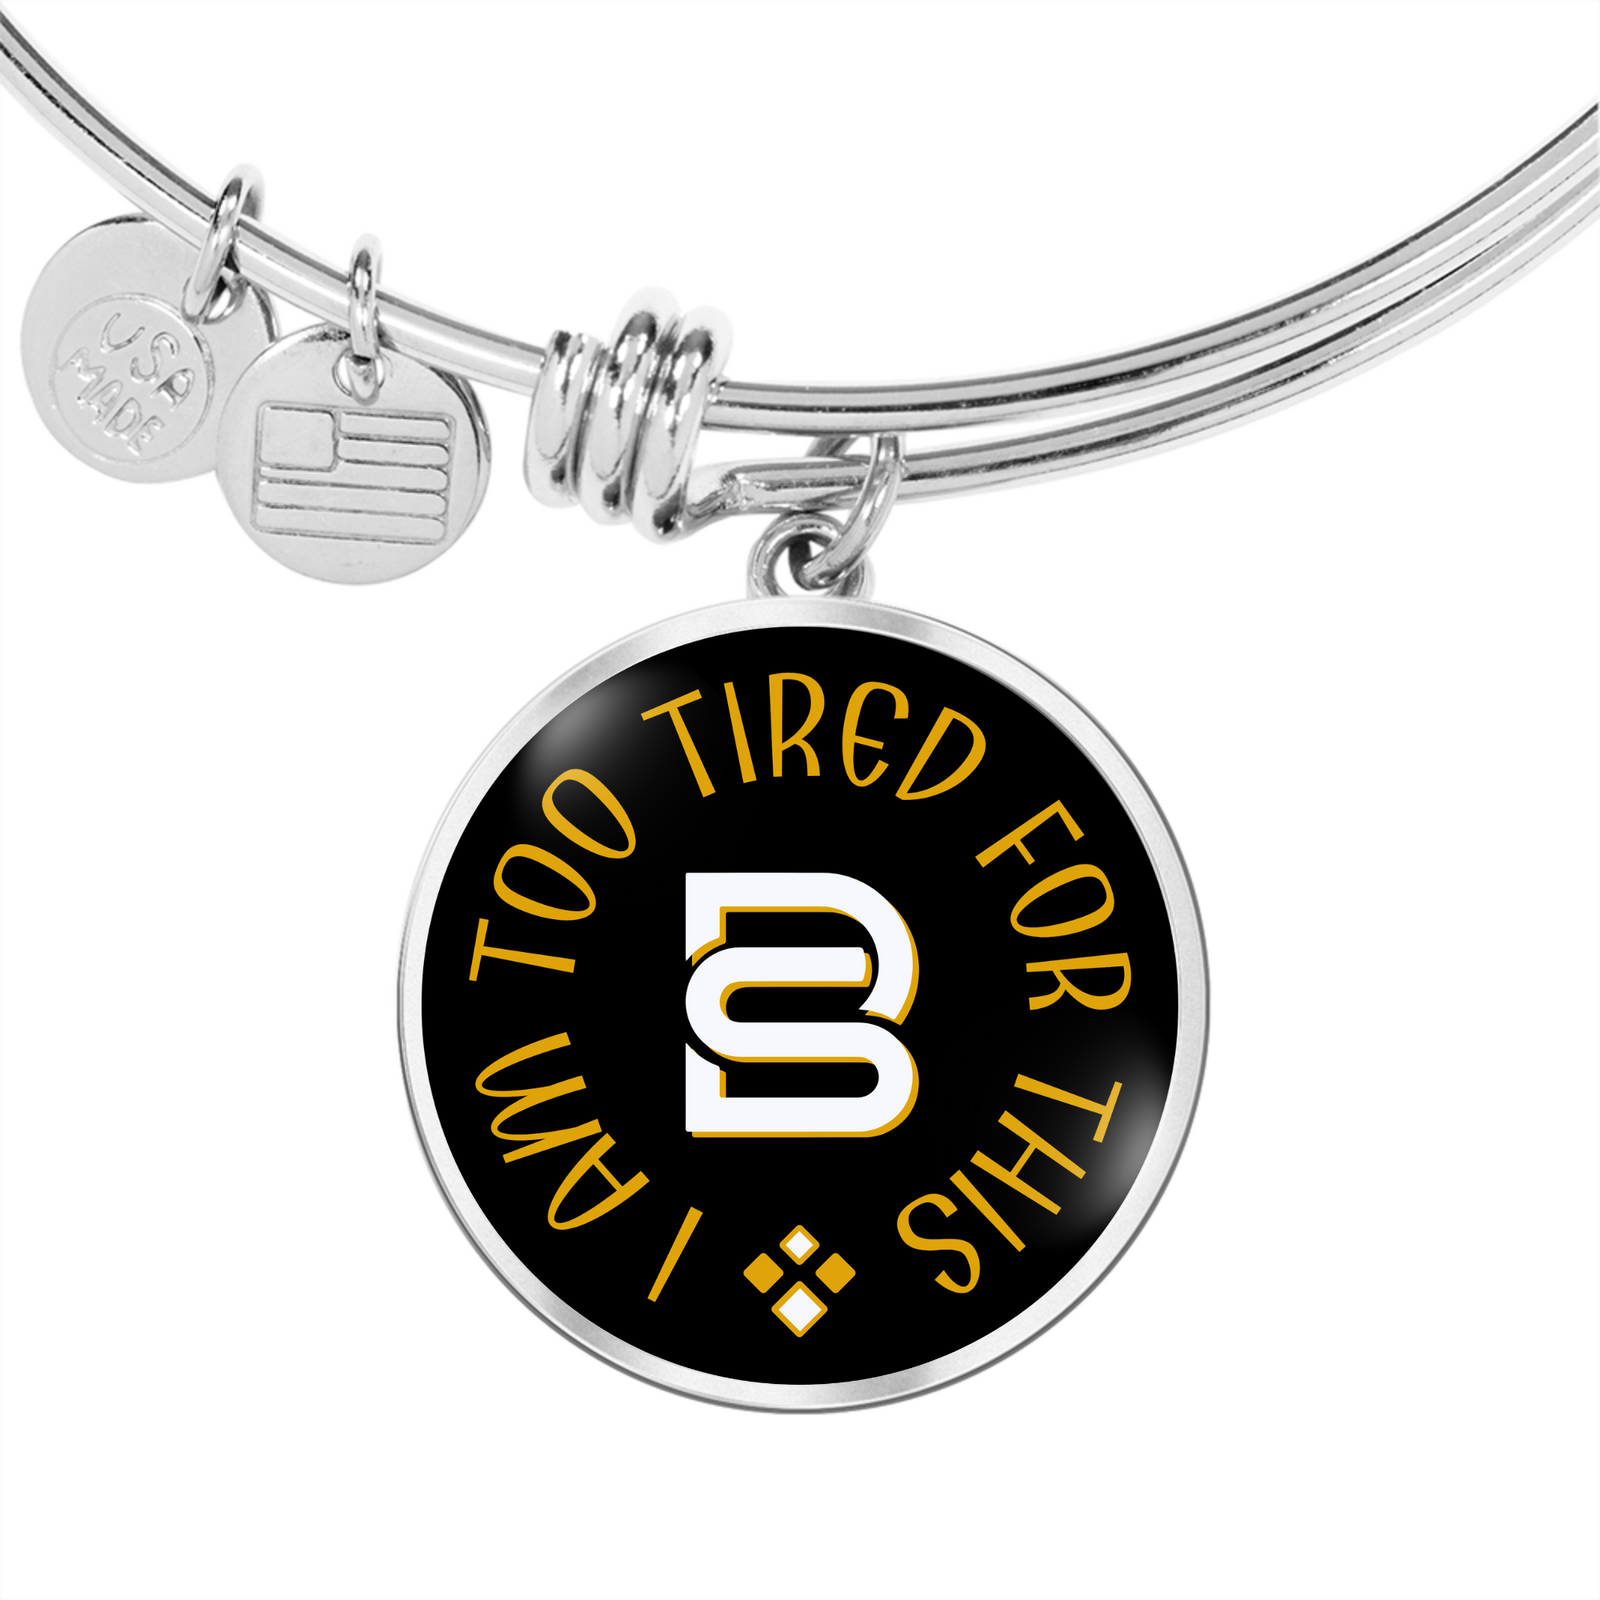 TIRED - I AM TOO || Pendant Bangle || PERSONALIZABLE